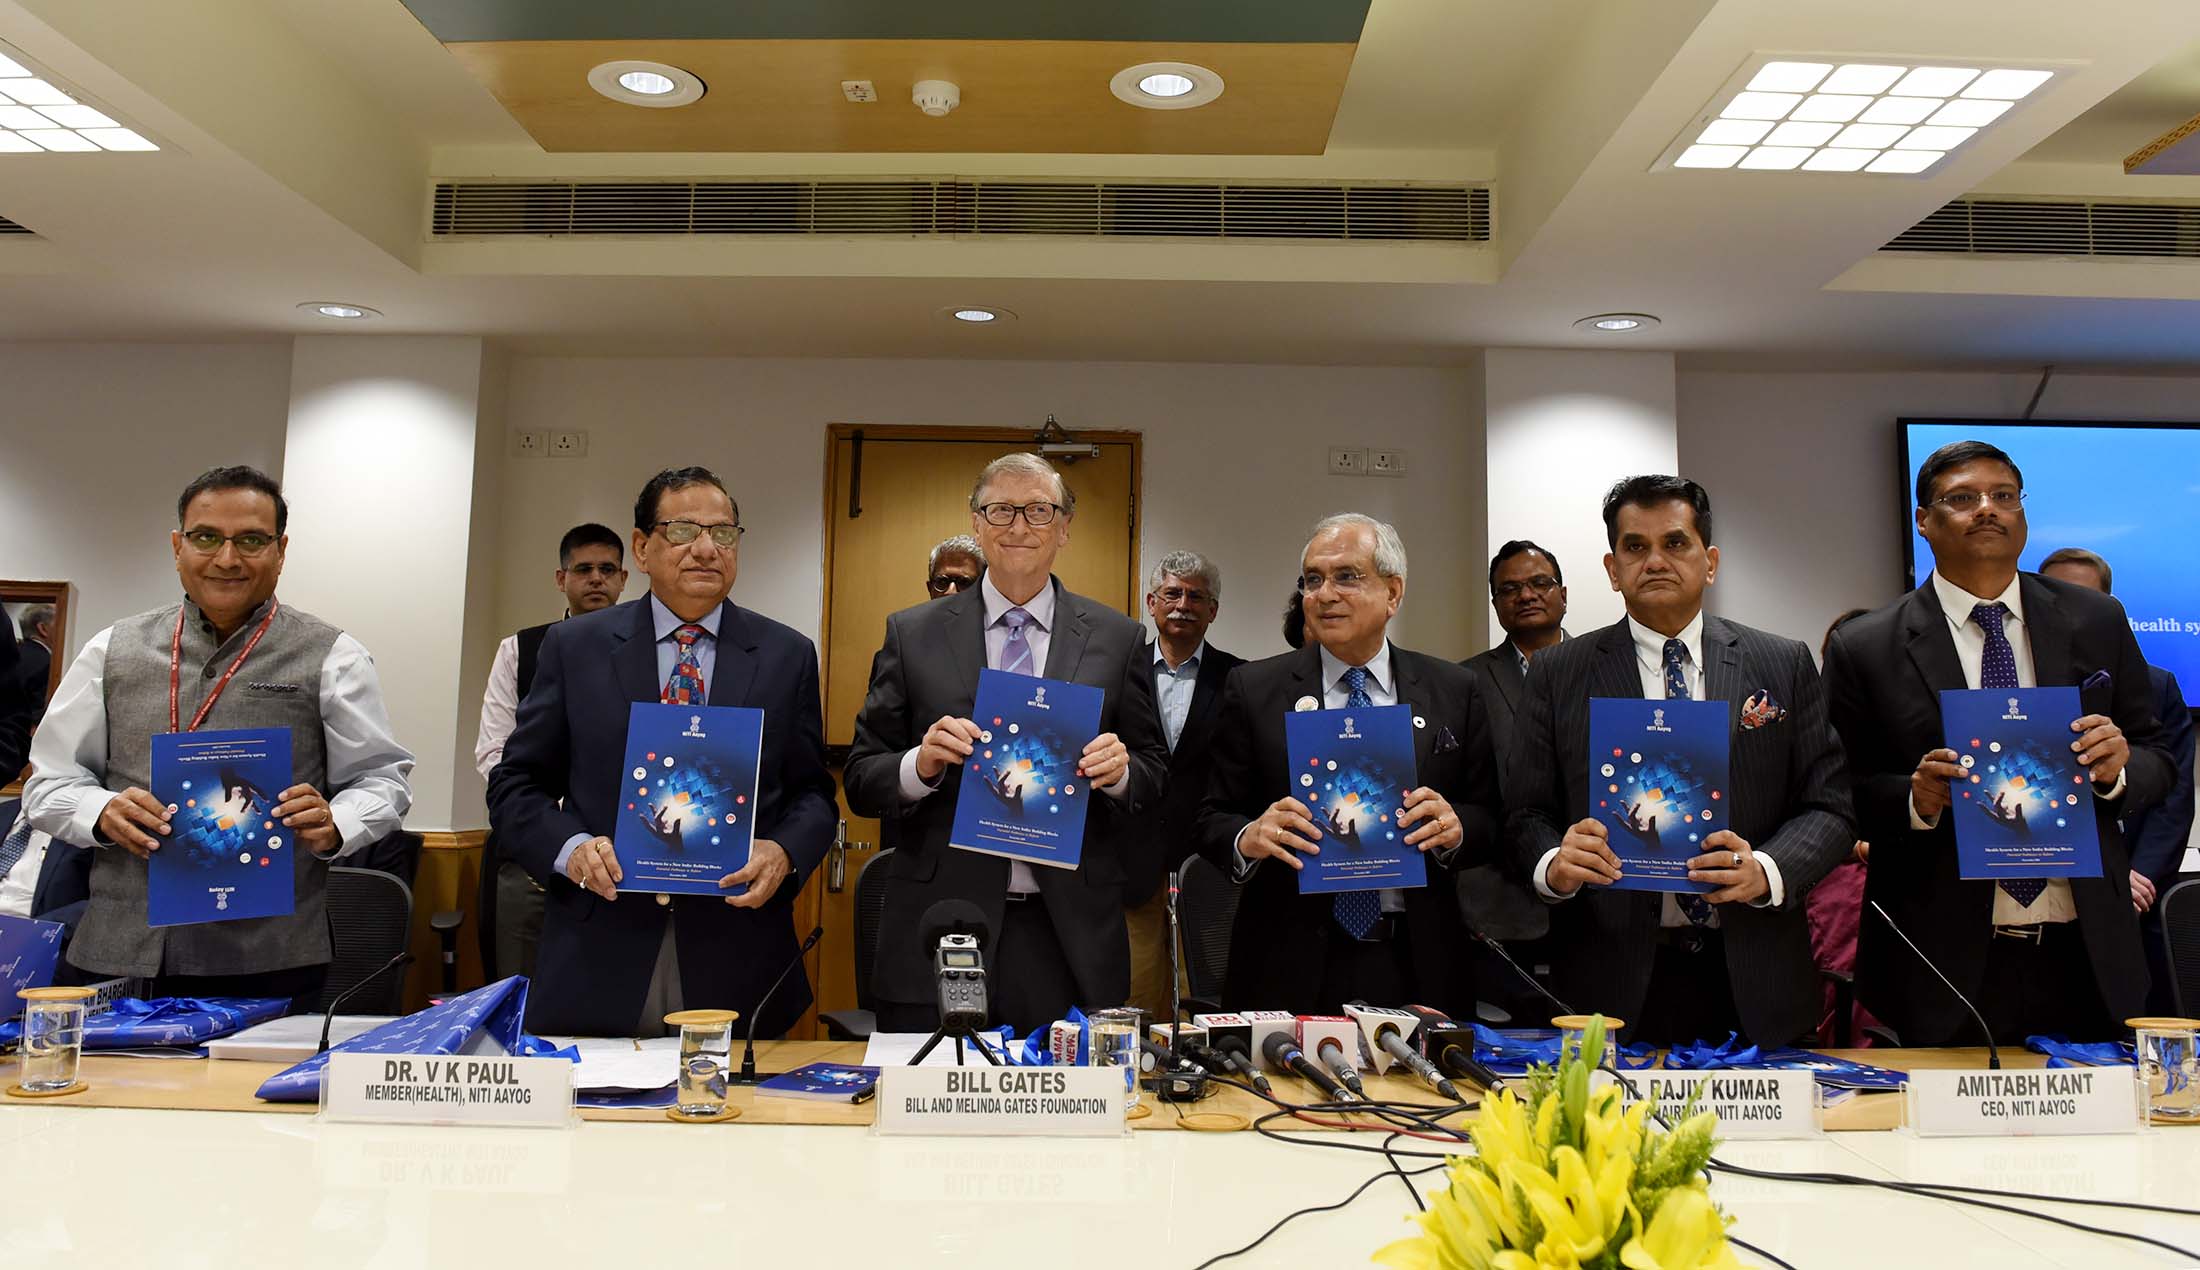 NITI Aayog releases Report on Building a 21st Century Health System for India